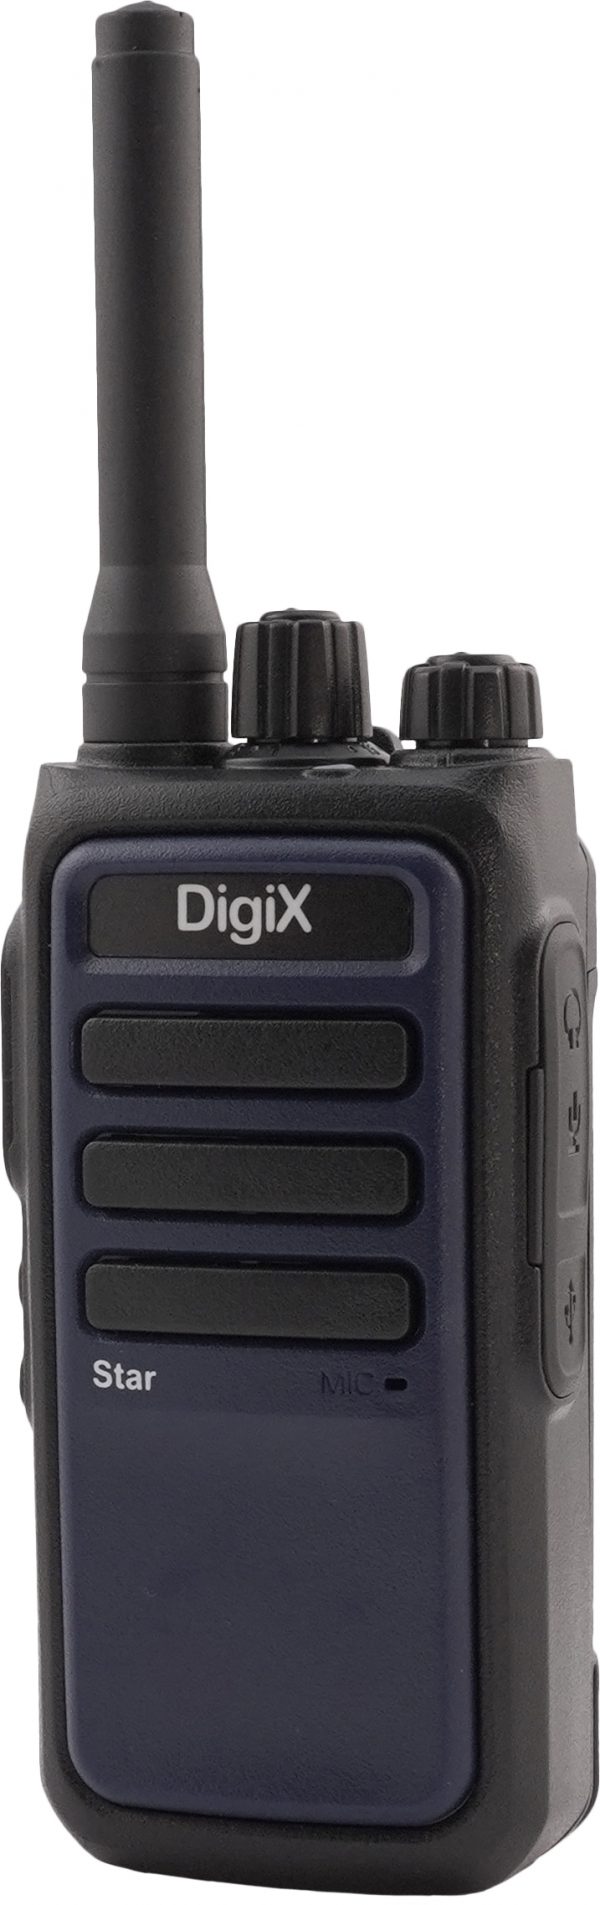 DigiX Star Front